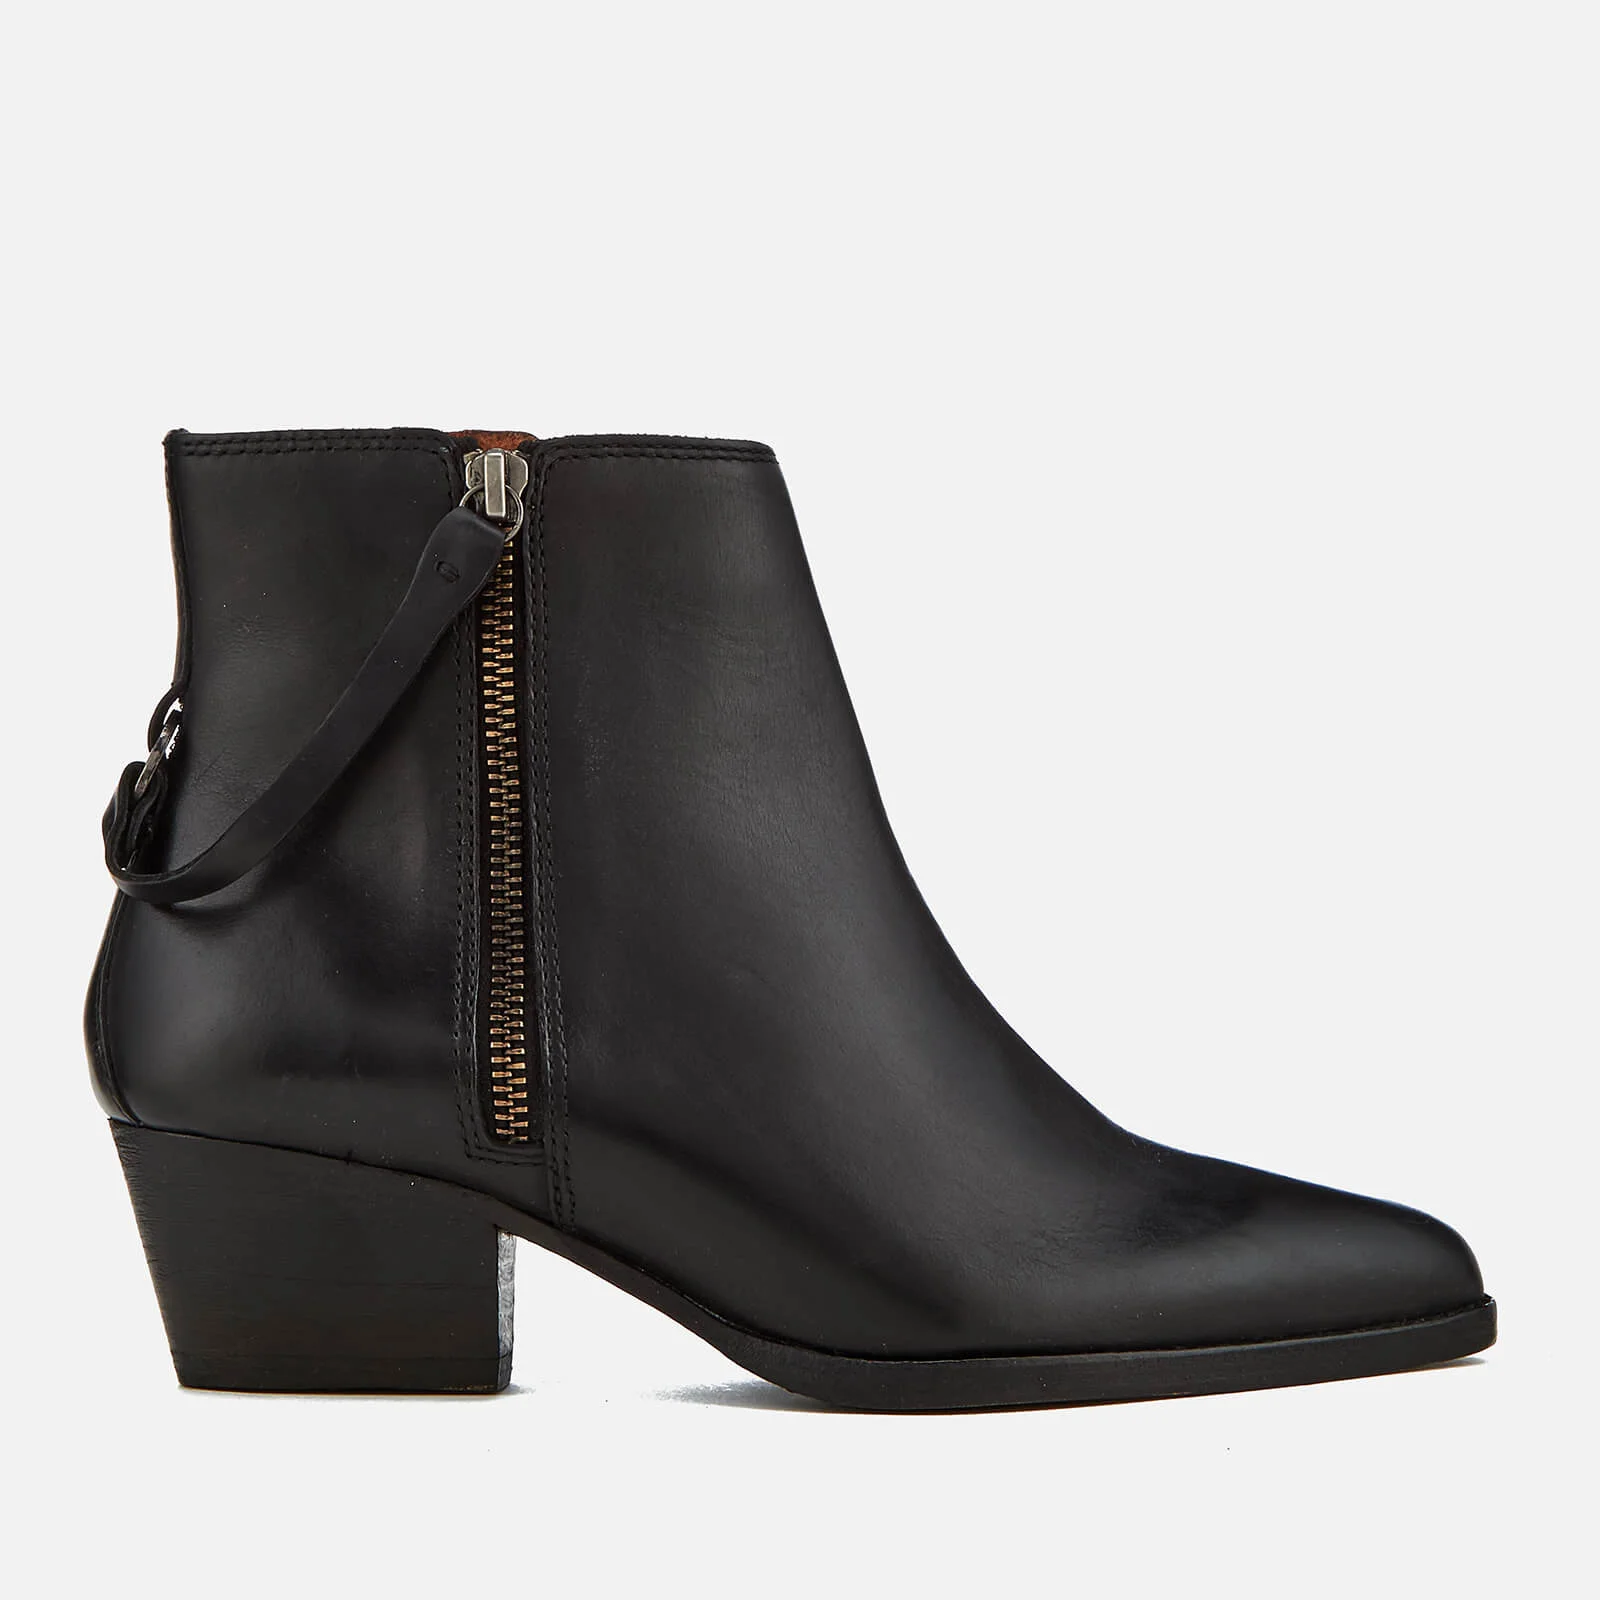 Hudson London Women's Larry Leather Heeled Ankle Boots - Black Image 1